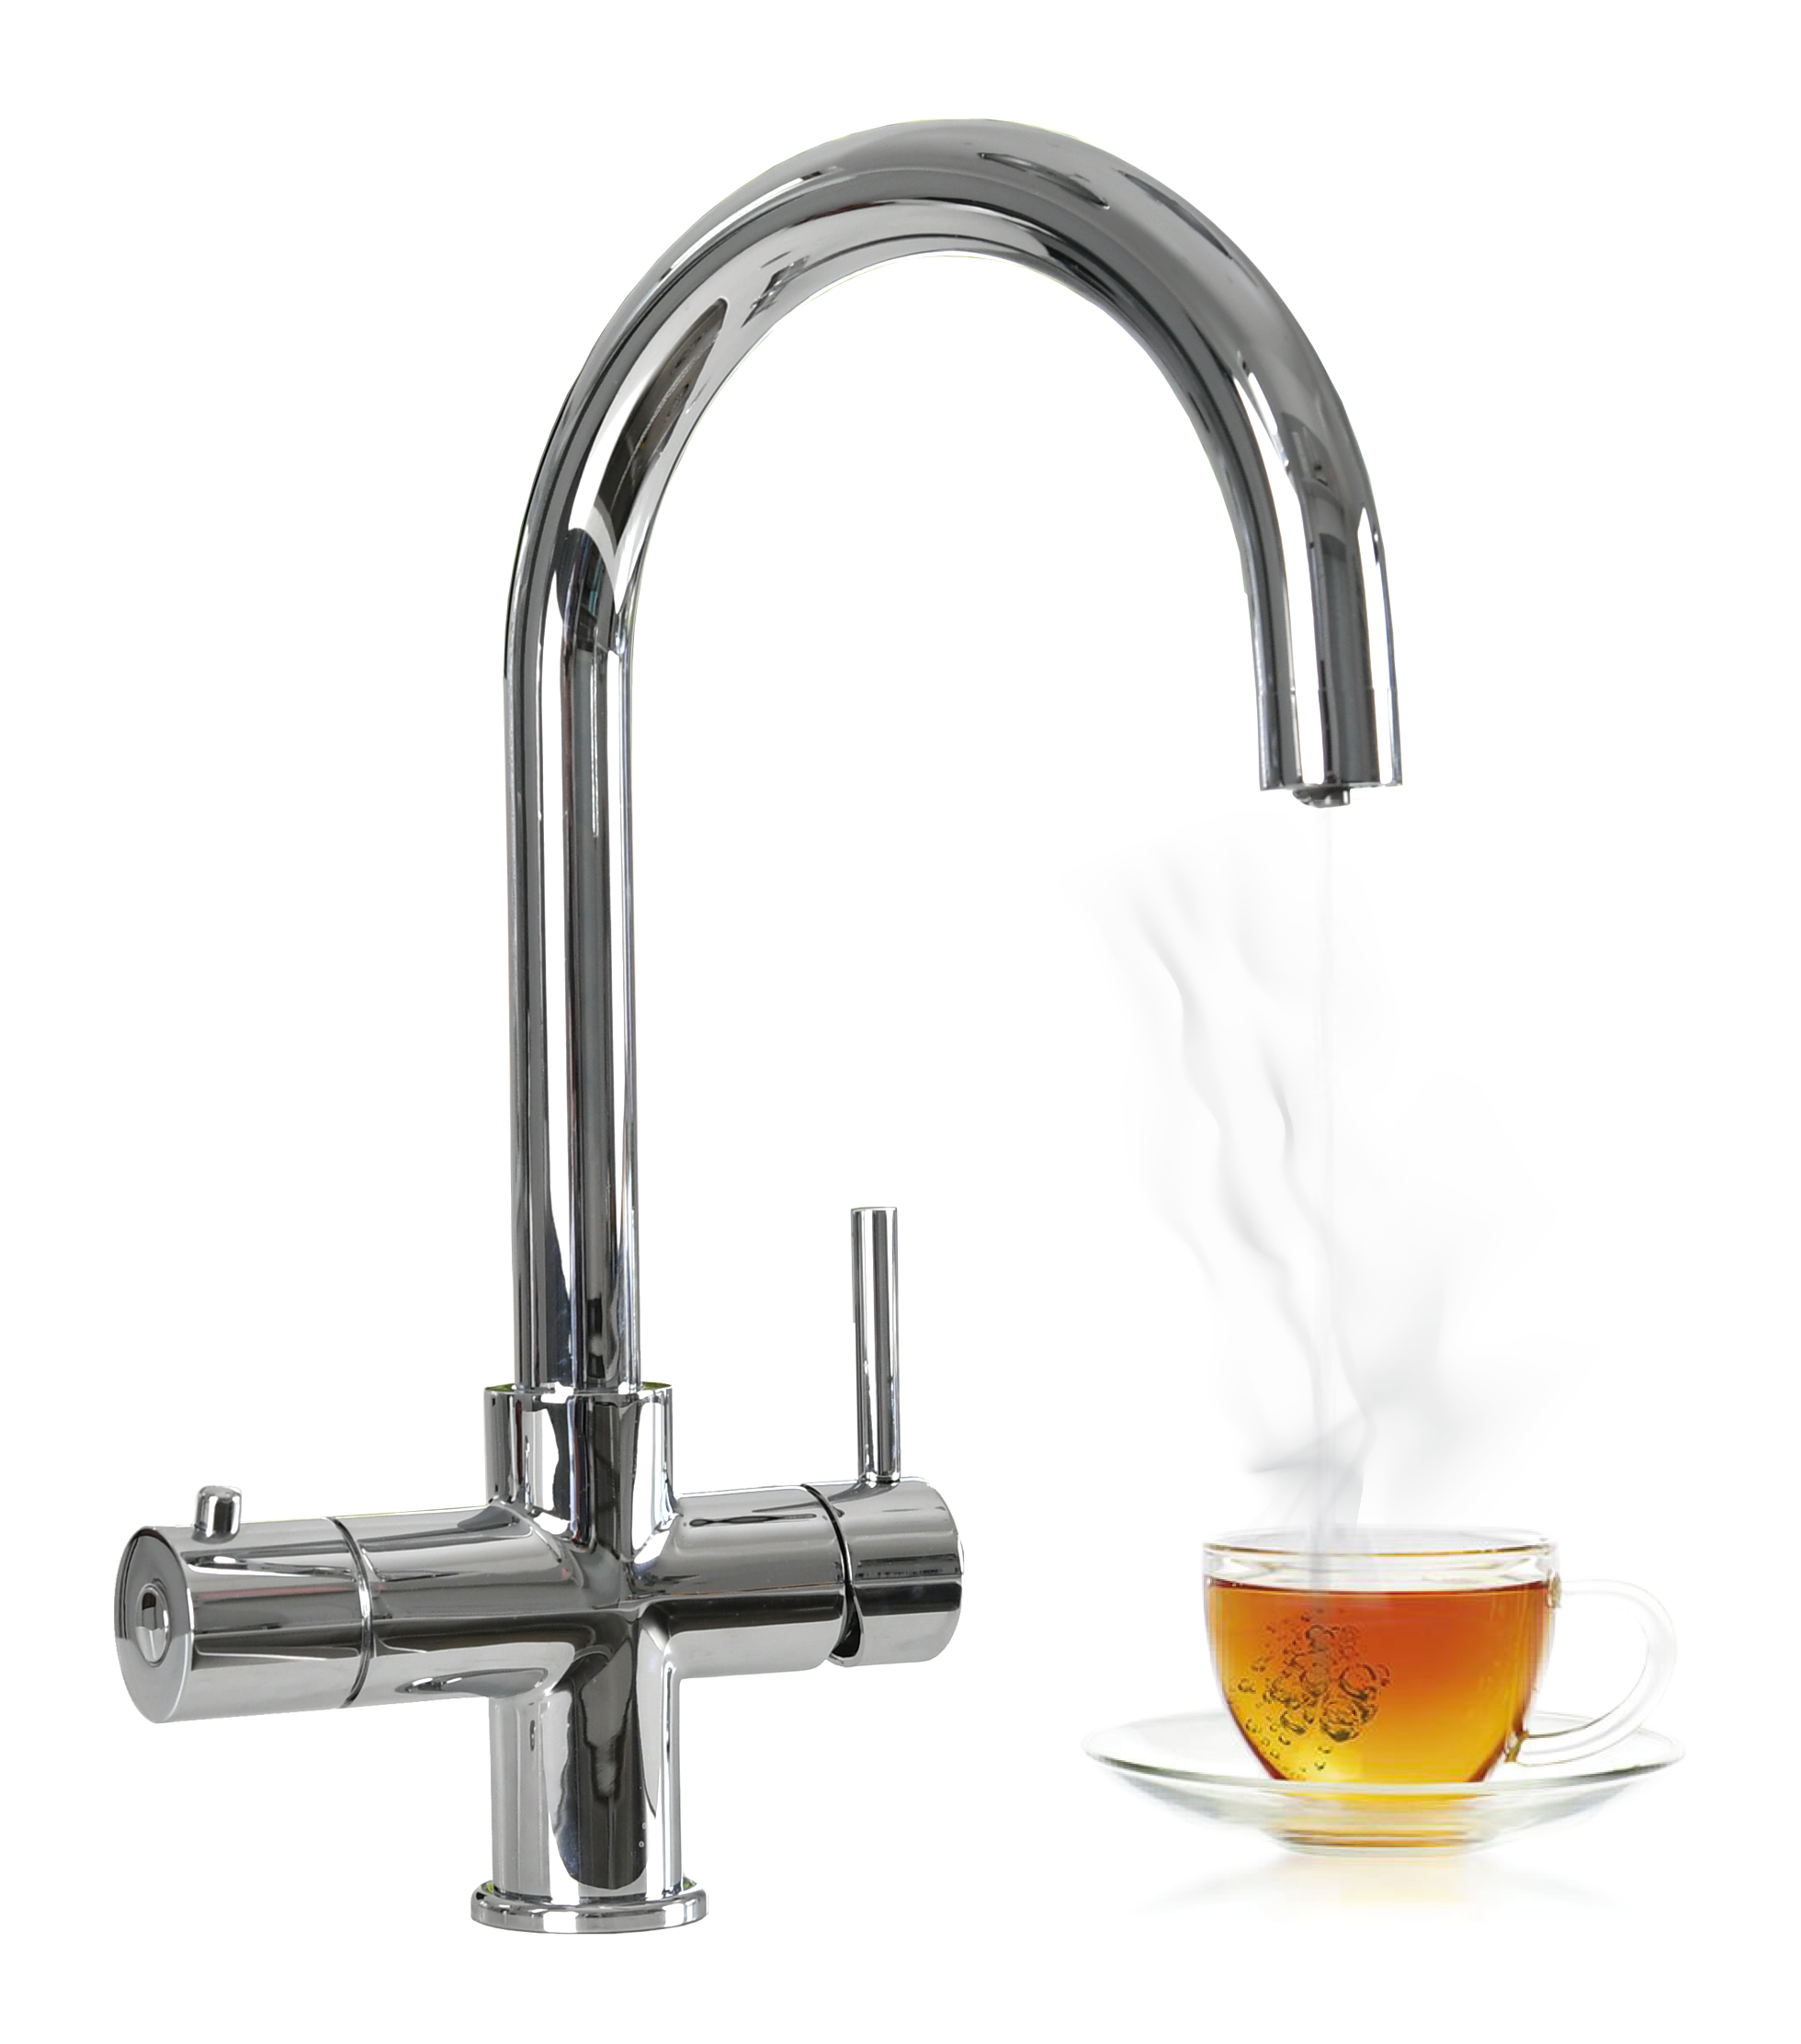 Five reasons to ditch the kettle and get a boiling tap